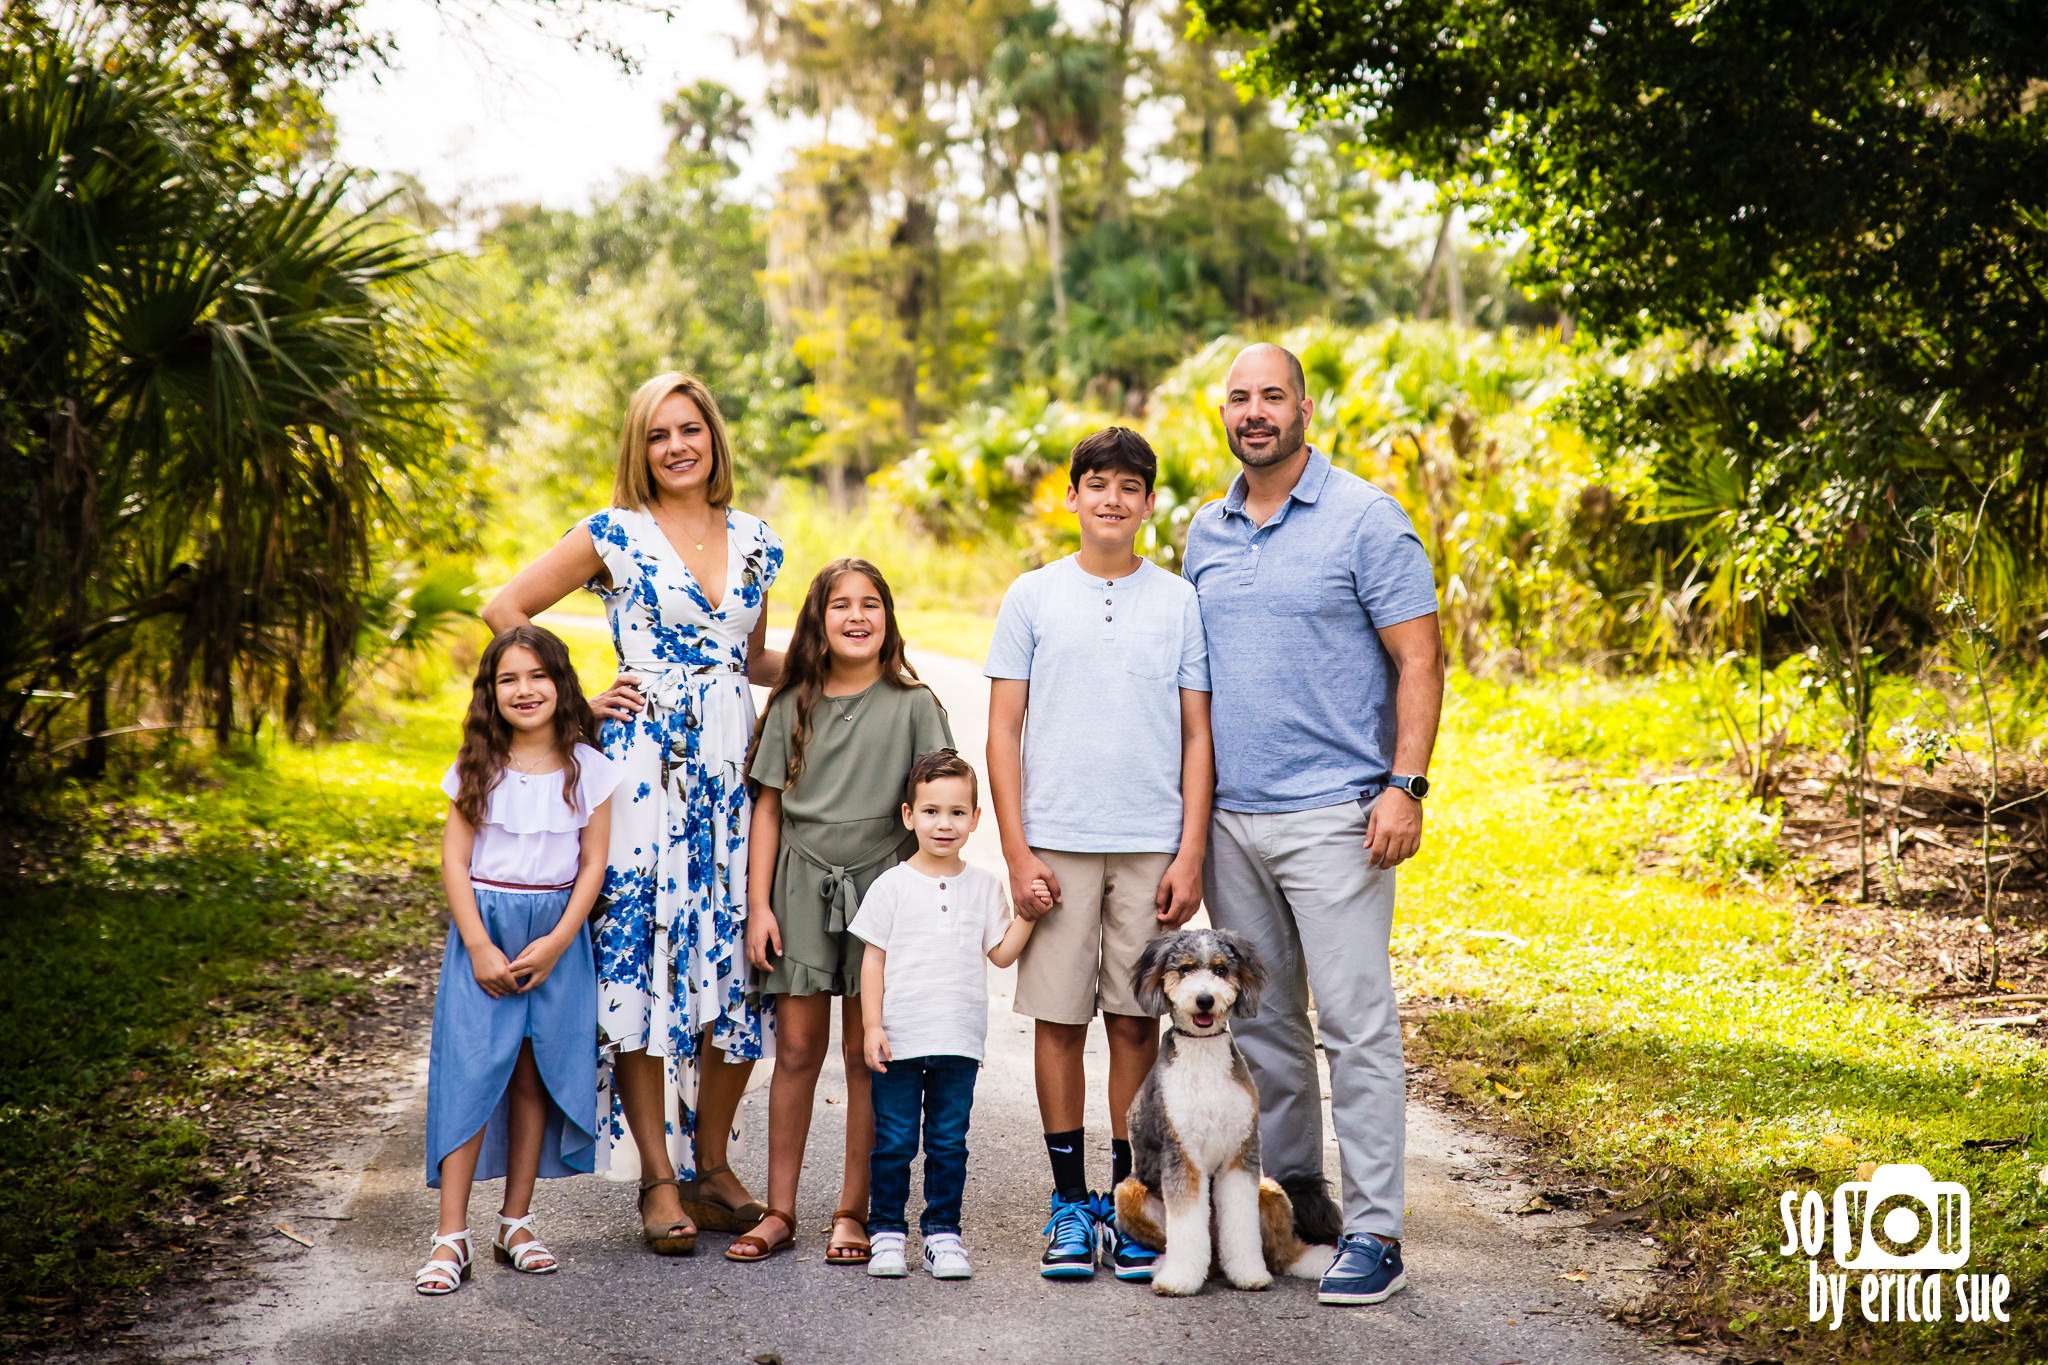 1-lifestyle-family-photographer-riverbend-park-jupiter-fl-so-you-by-erica-sue-ES1_8003.JPG